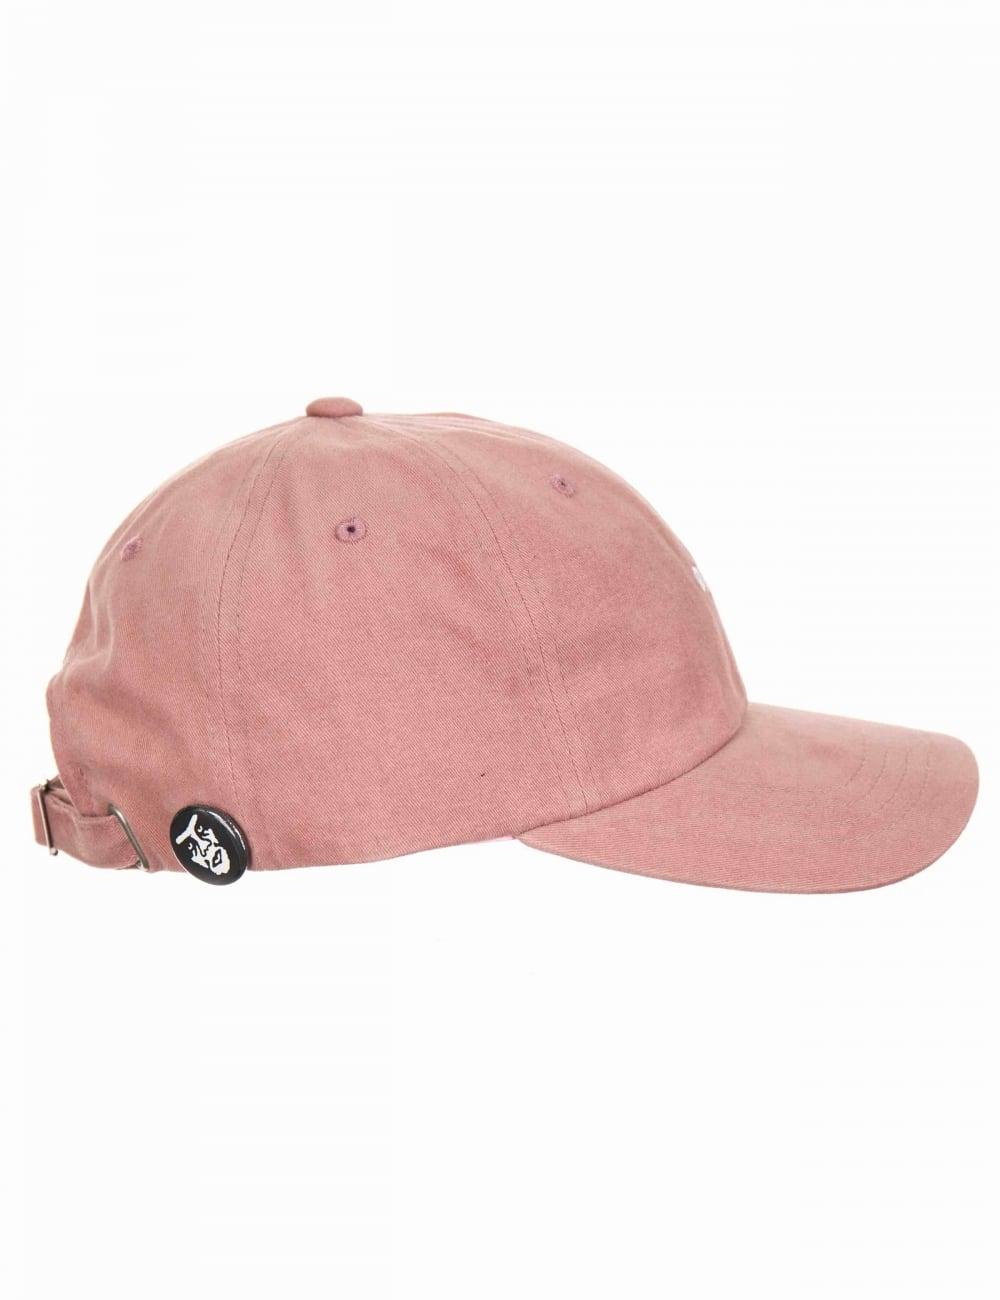 OBEY Clothing Rose Logo - Obey Clothing Jumble Bar III 6 Panel Hat - Rose - Obey Clothing from ...